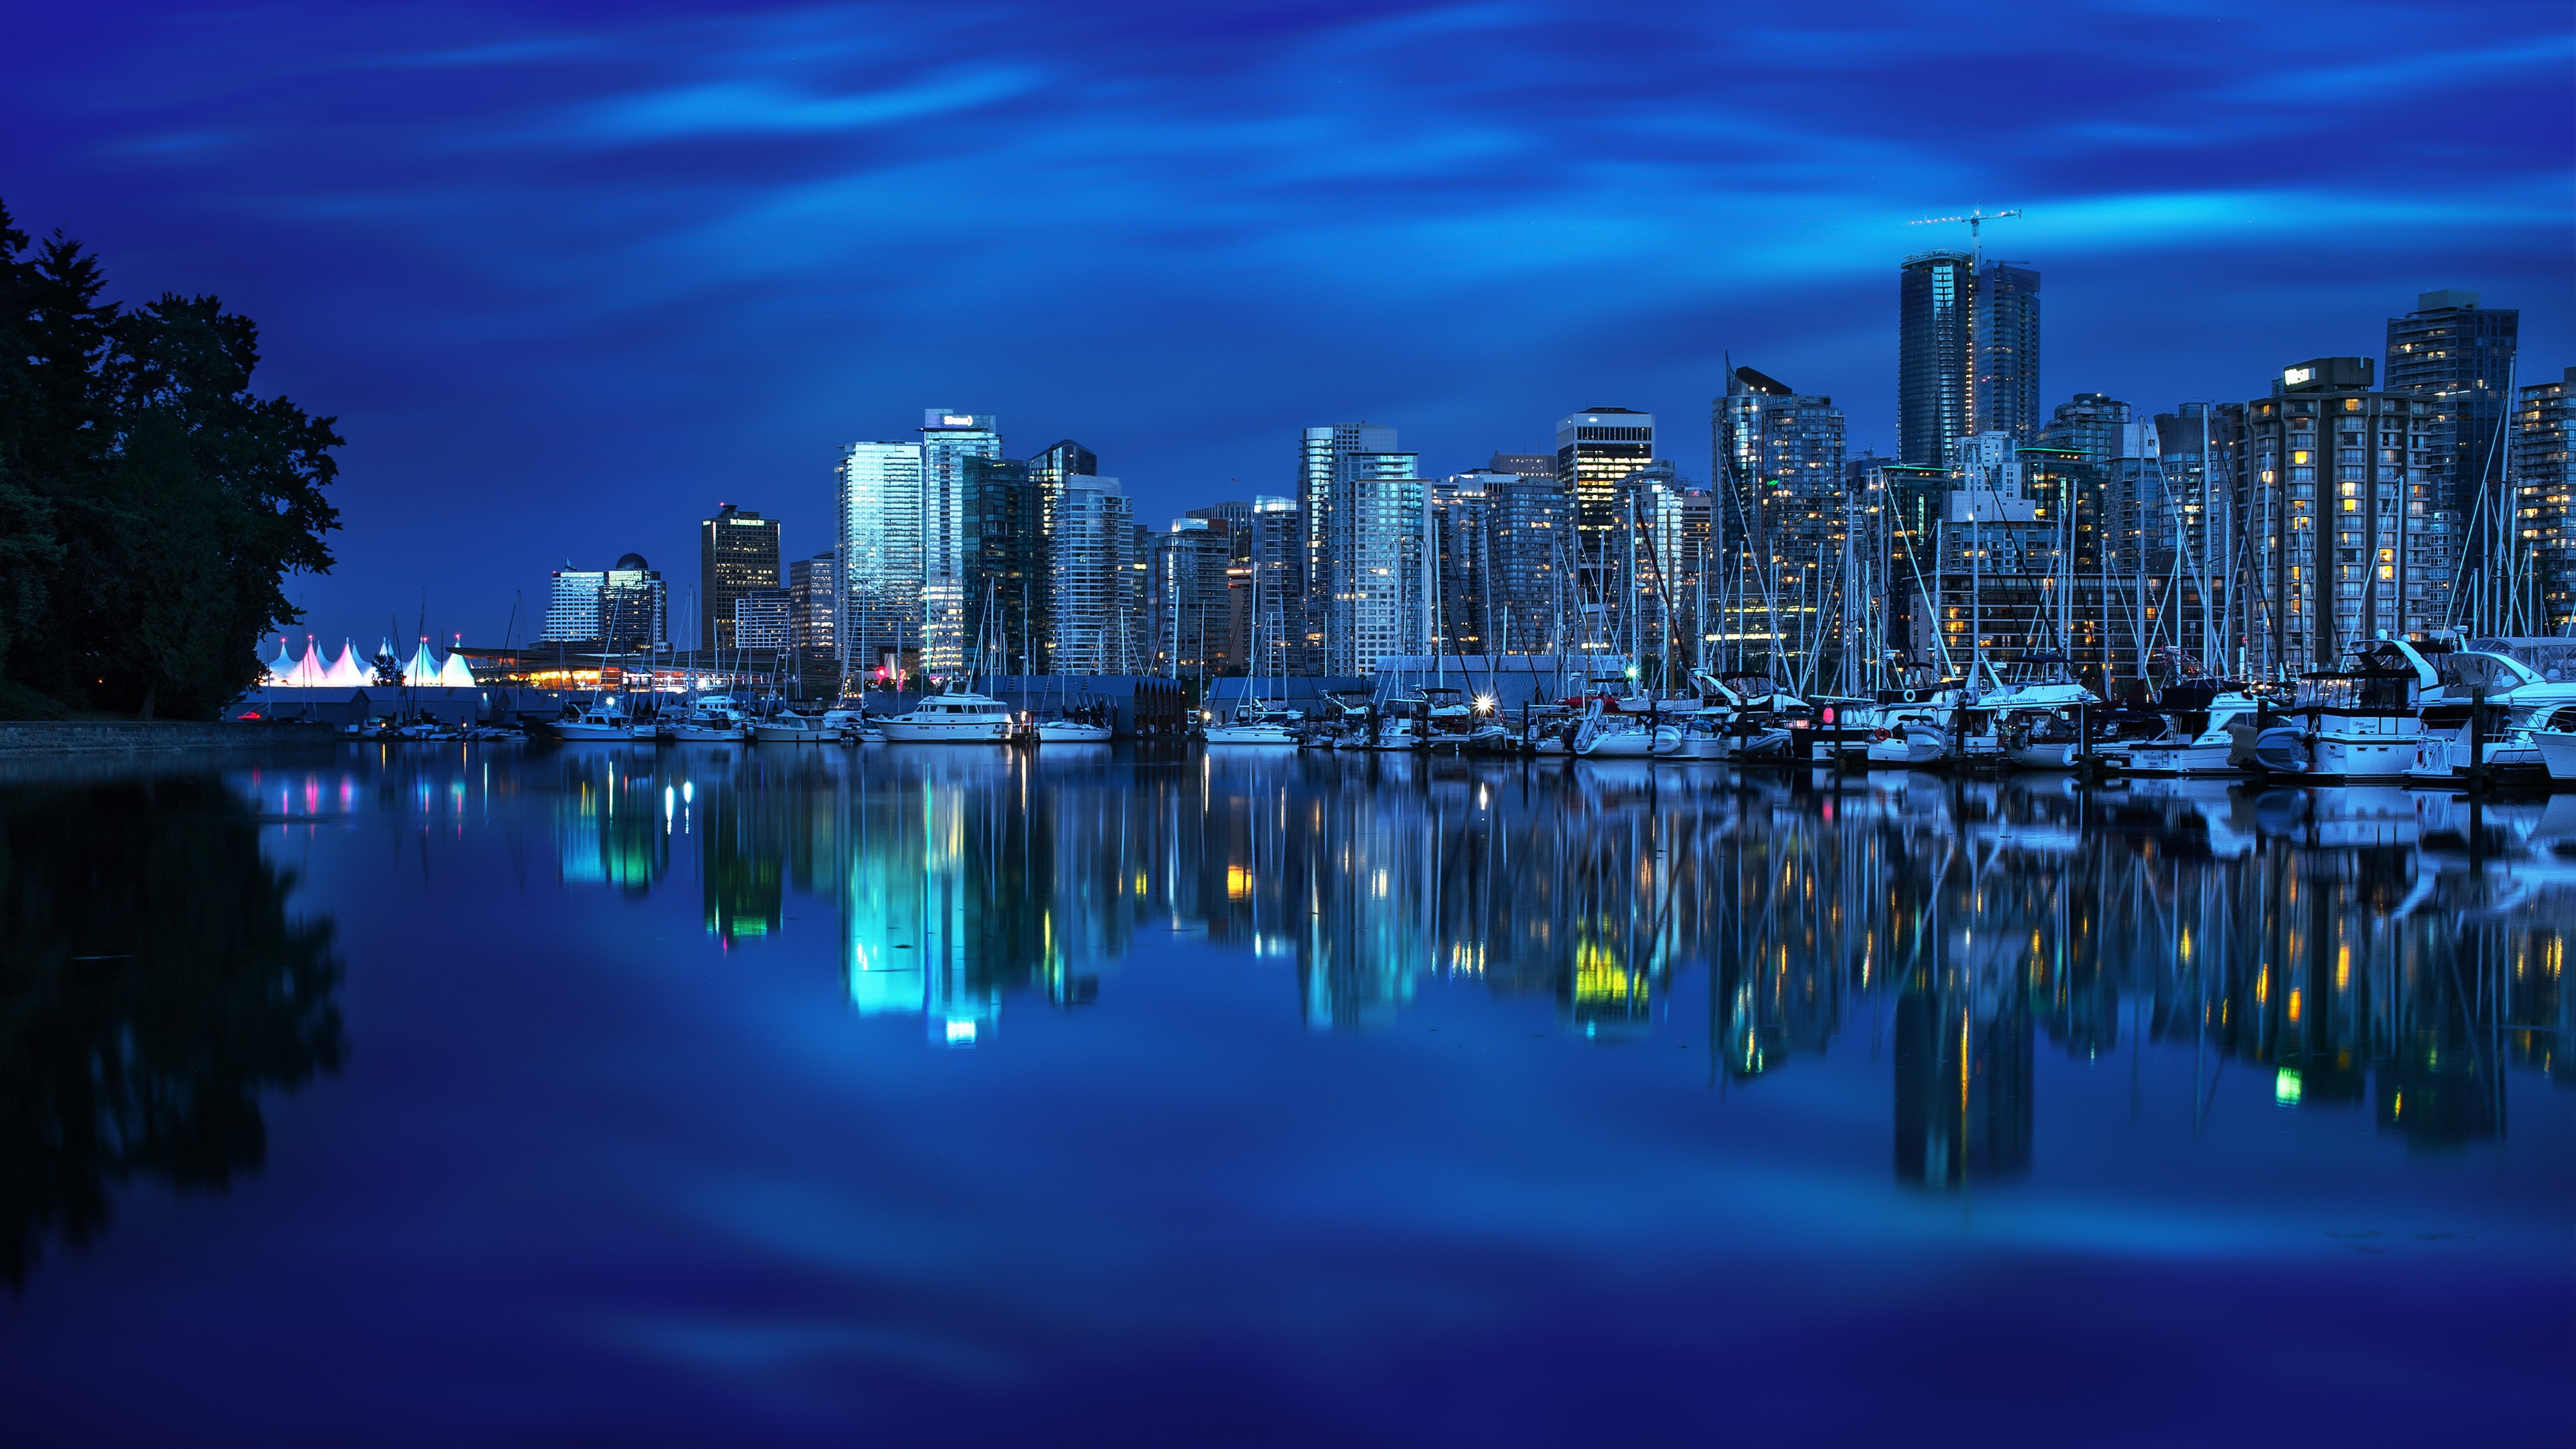 Vancouver, British Columbia, Canada, yacht, bay, reflection, buildings, city night